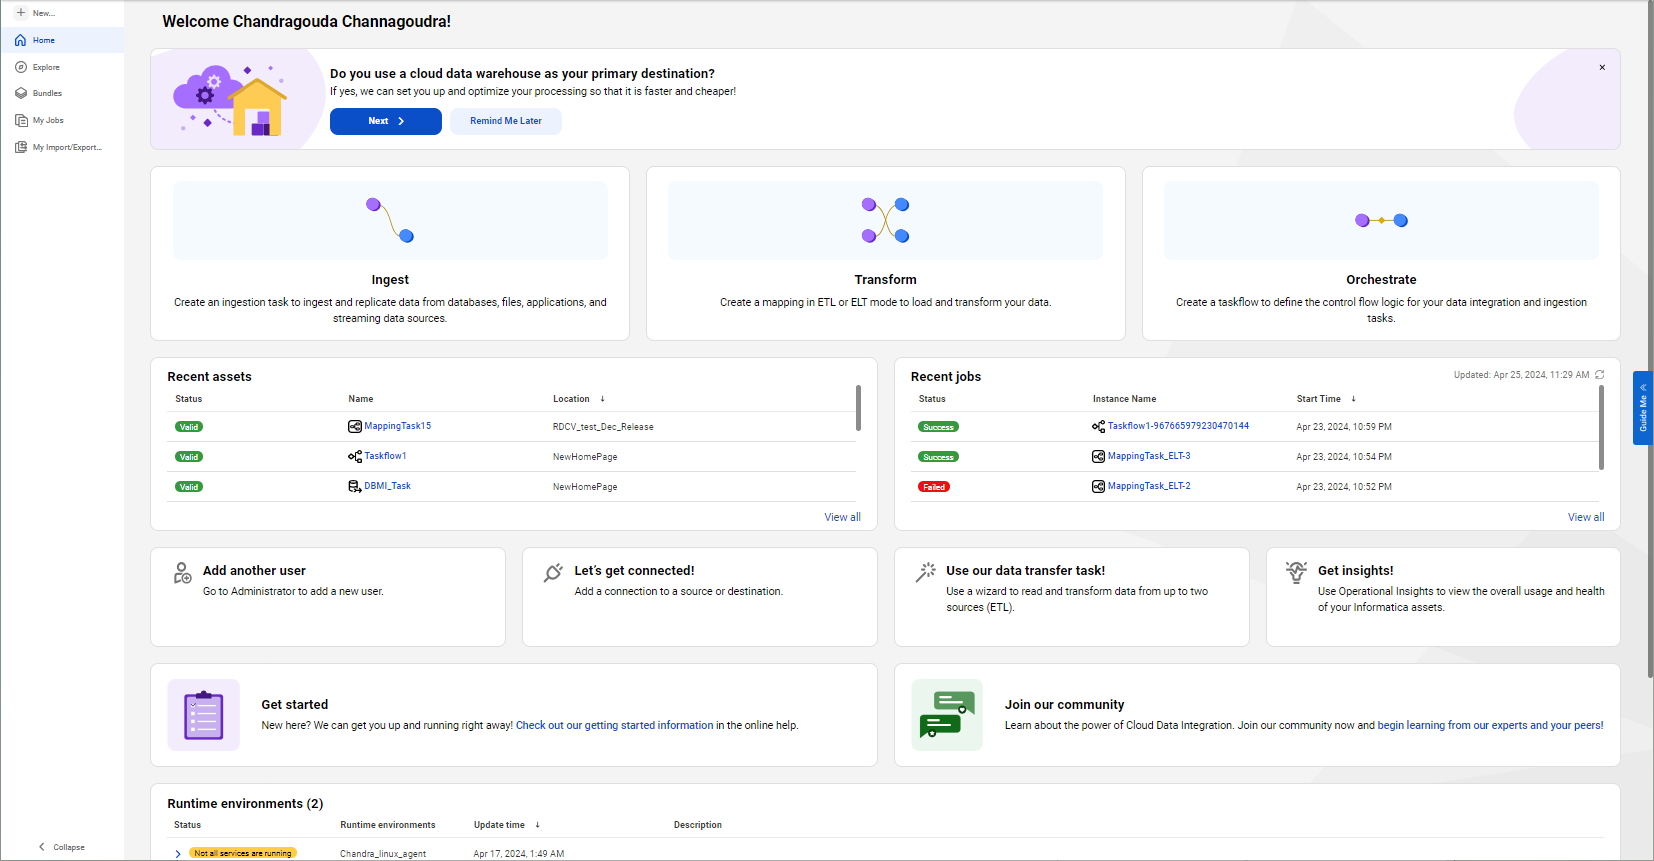 This version of the Home page displays the following panels: "Do you use a cloud data warehouse as your primary destination," "Ingest," "Transform," "Orchestrate," "Recent assets", "Recent jobs," "Add another user," "Let's get connected," "Use our data transfer task," Get insights," "Get started," "Join our community," and "Runtime environments." 
				  